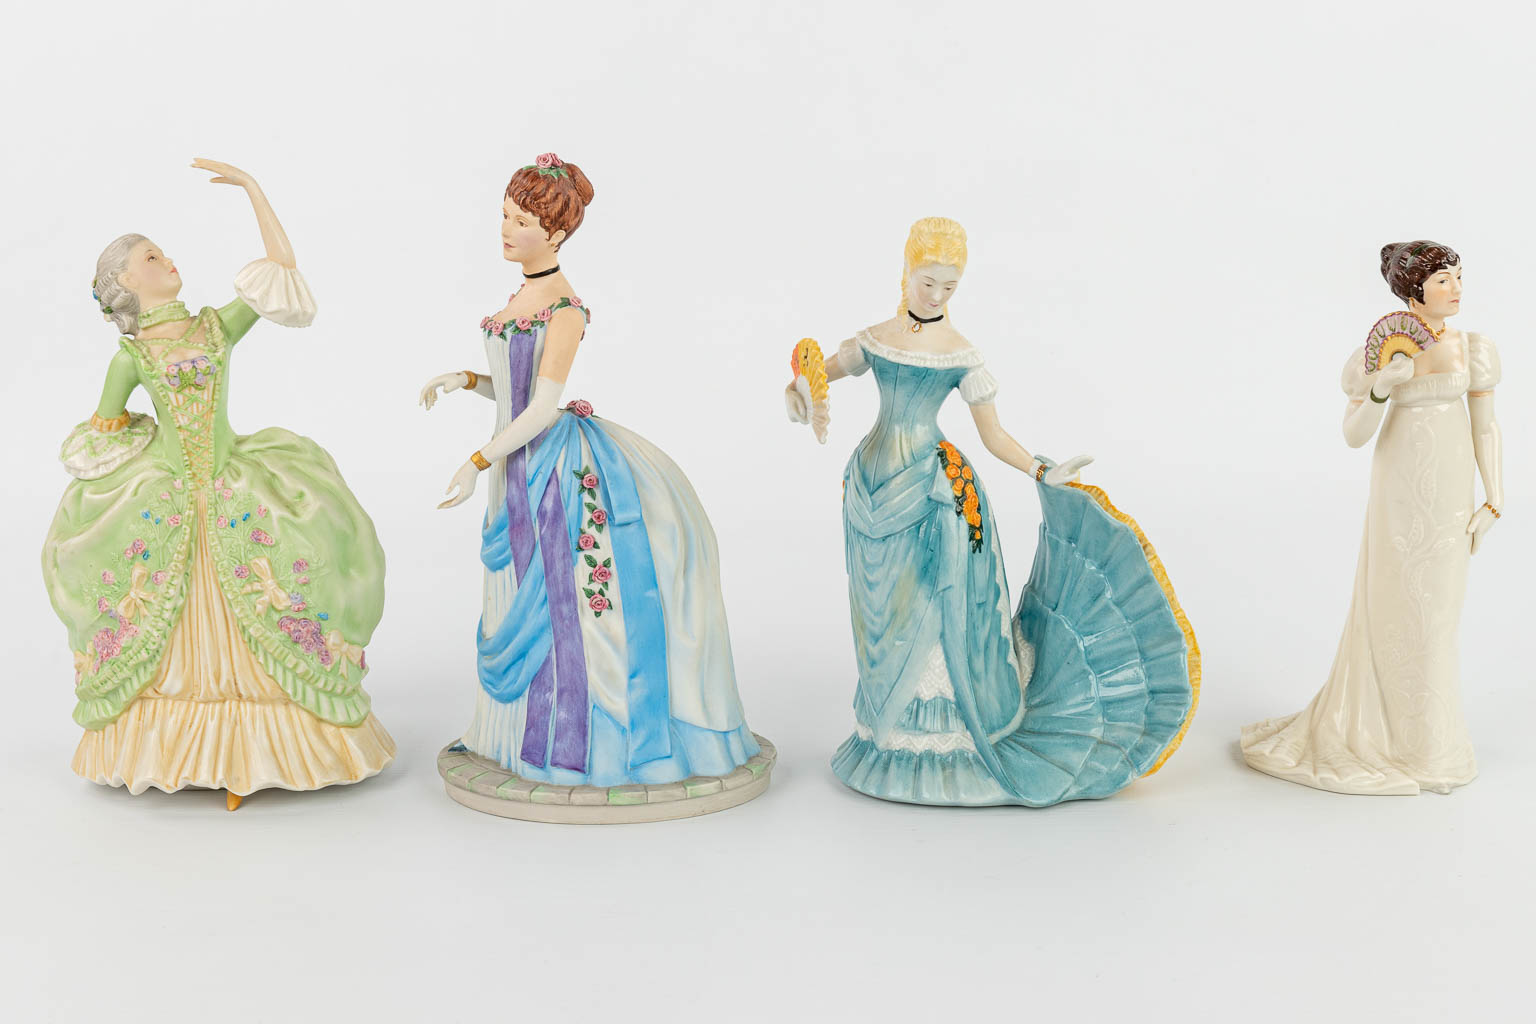 A collection of 7 porcelain statues made by Franklin Porcelain and The Franklin Mint. (H:24cm)